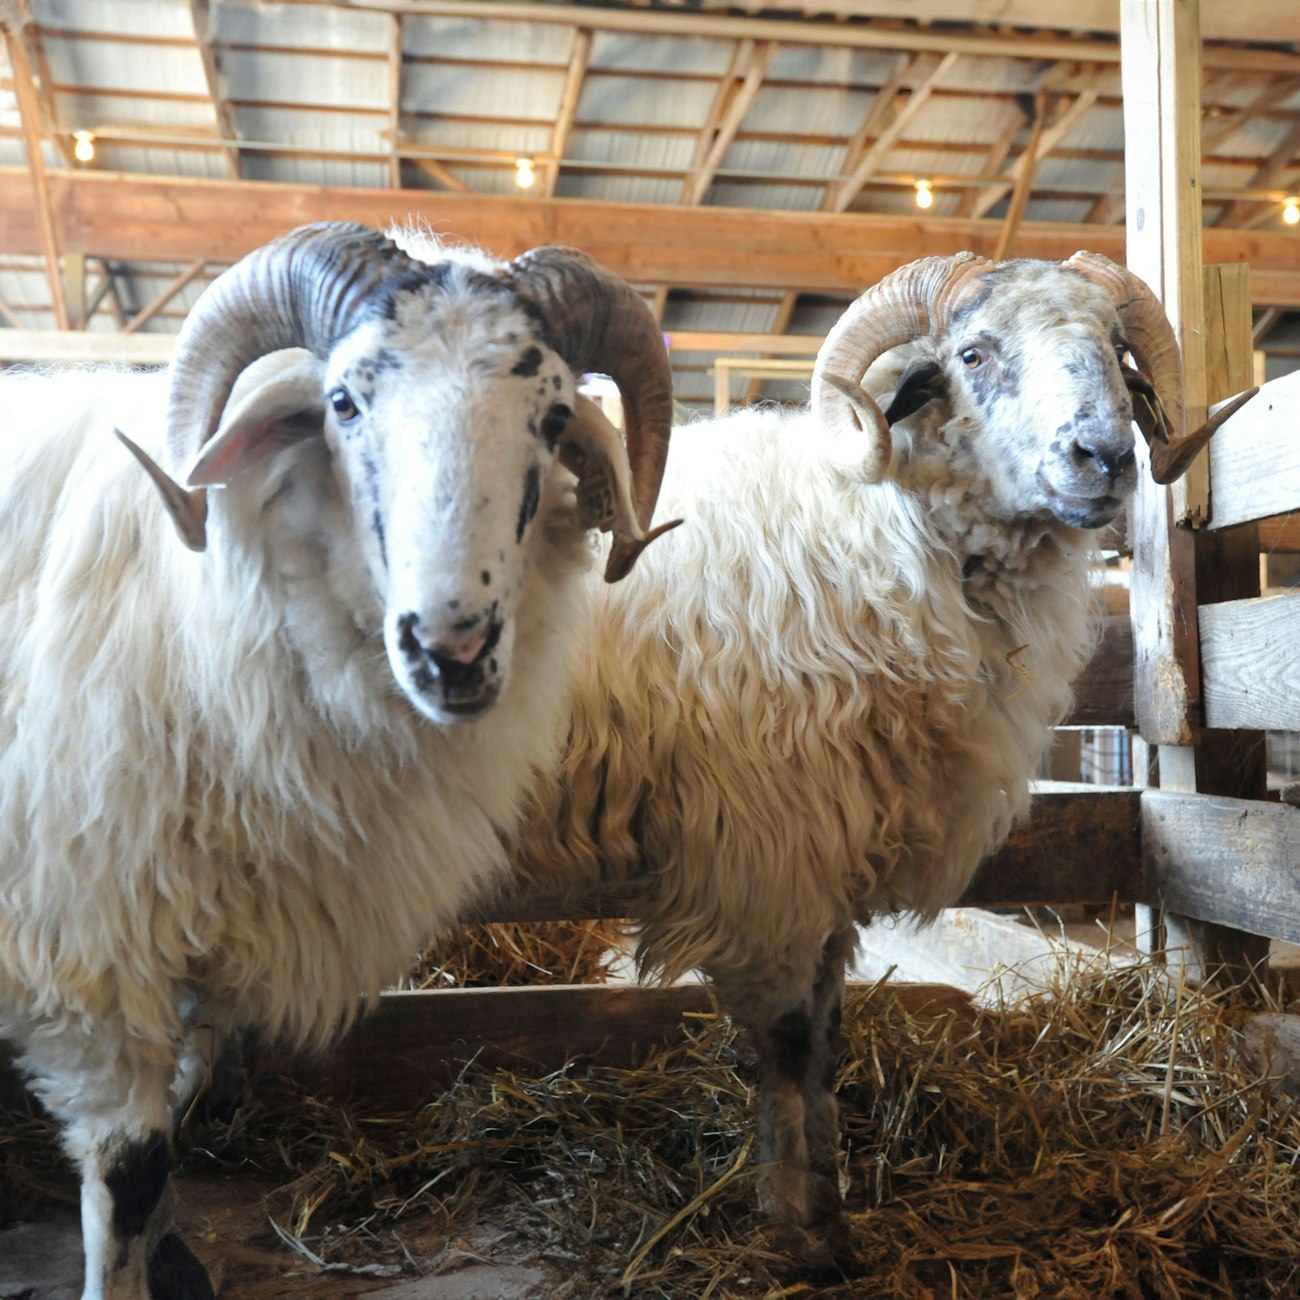 2 white sheep with long hair and curly horns in a stall in a barn